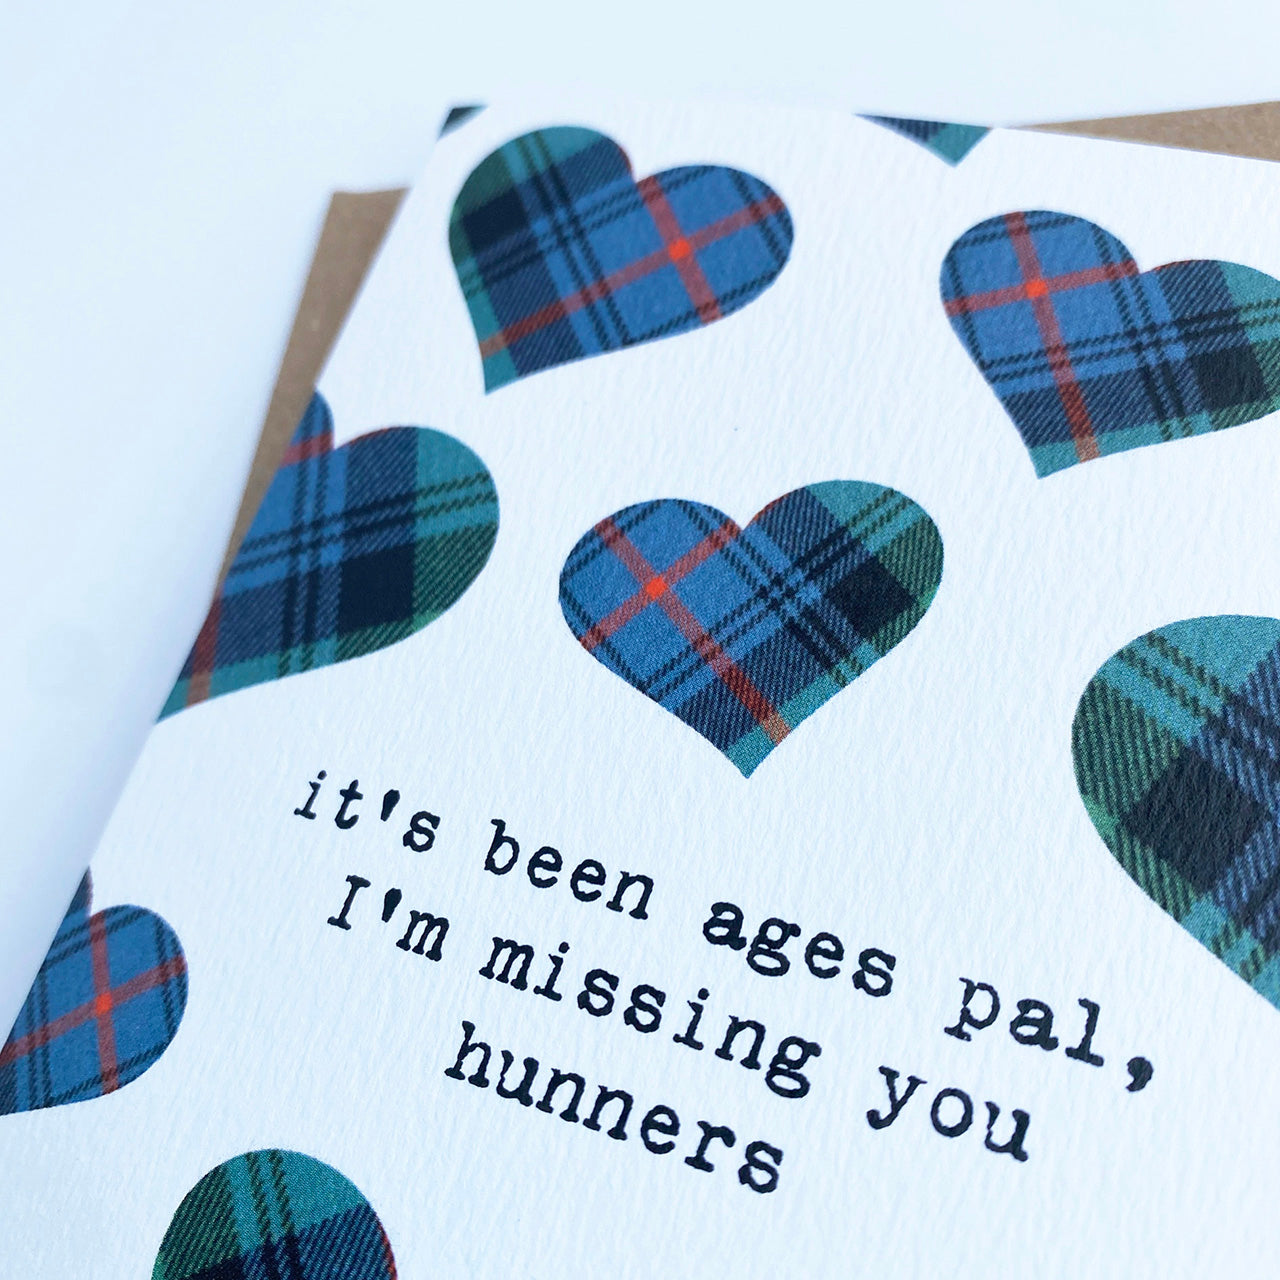 'Missing You Hunners' Scottish Thinking Of You Card - HiyaPal